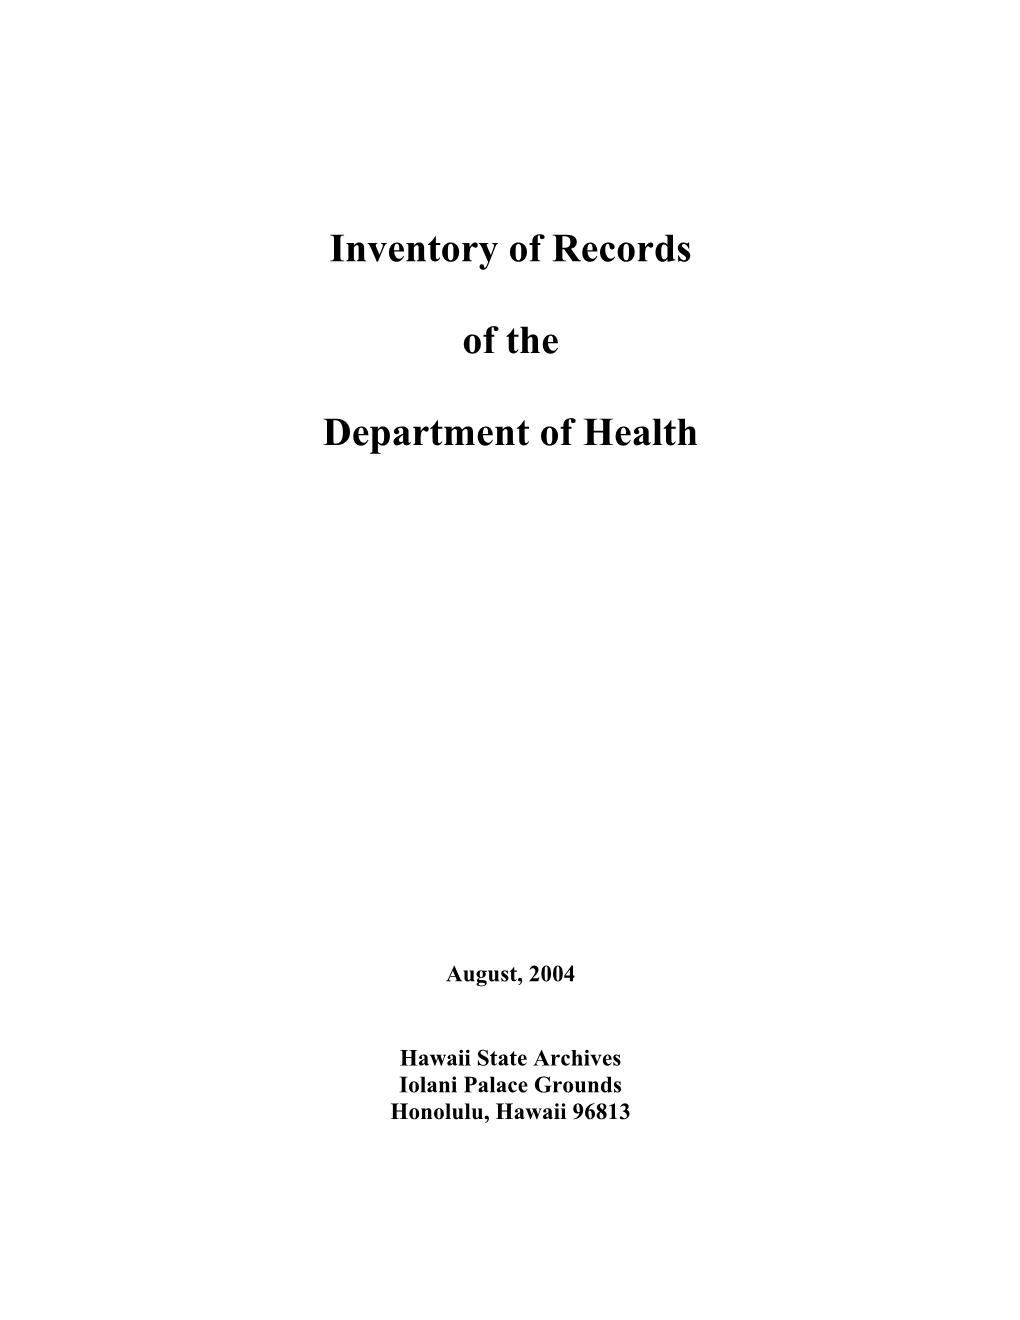 Inventory of Records of the Department of Health